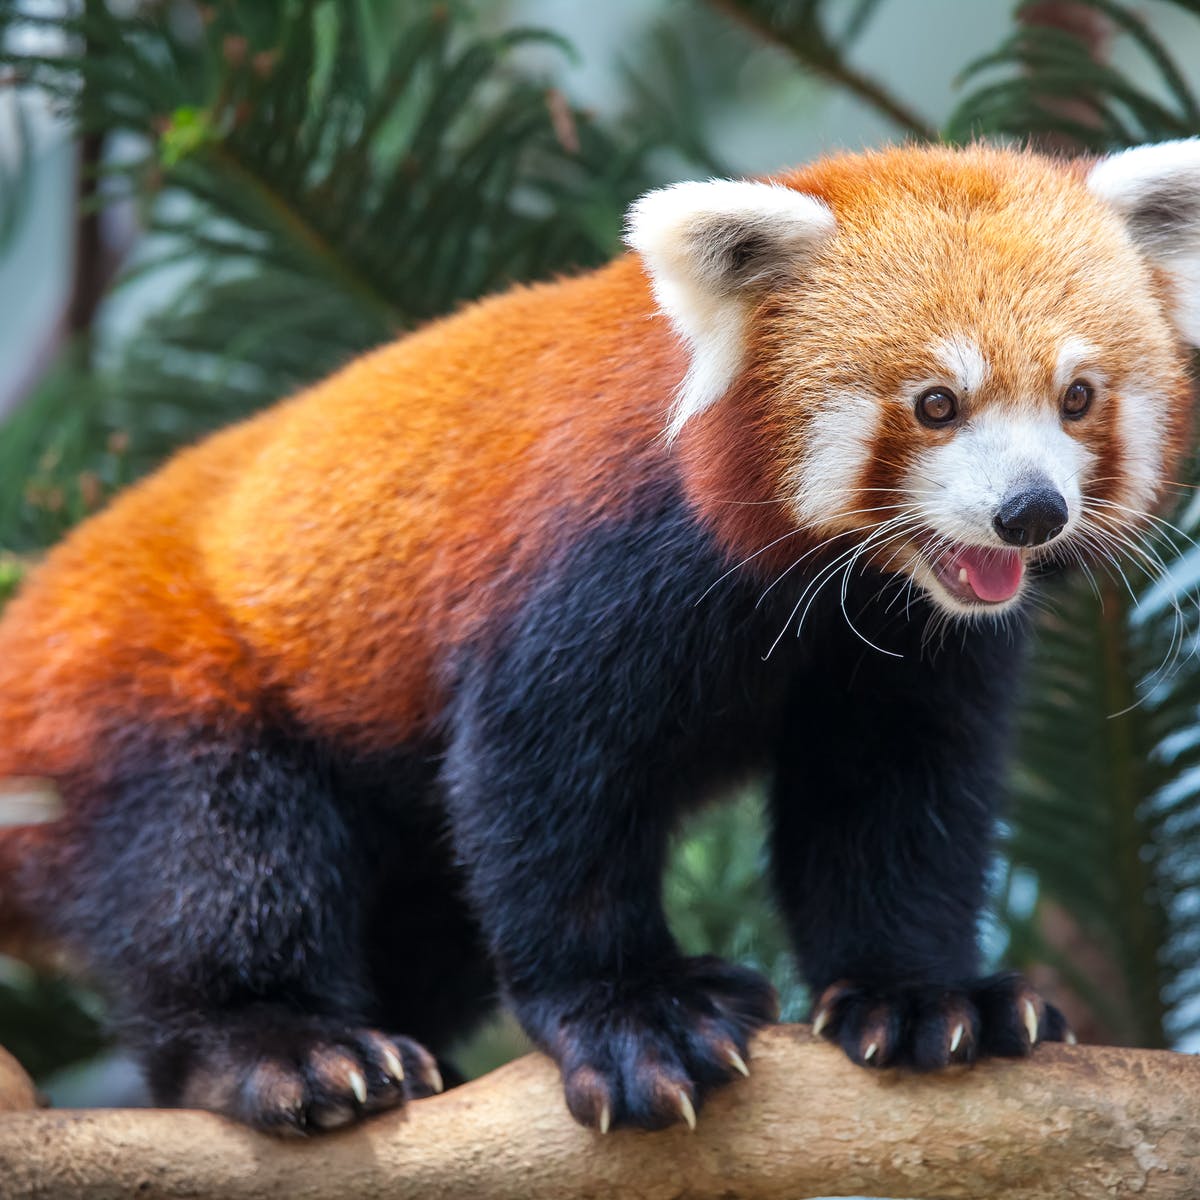 Why are Red pandas endangered? Red panda characteristics